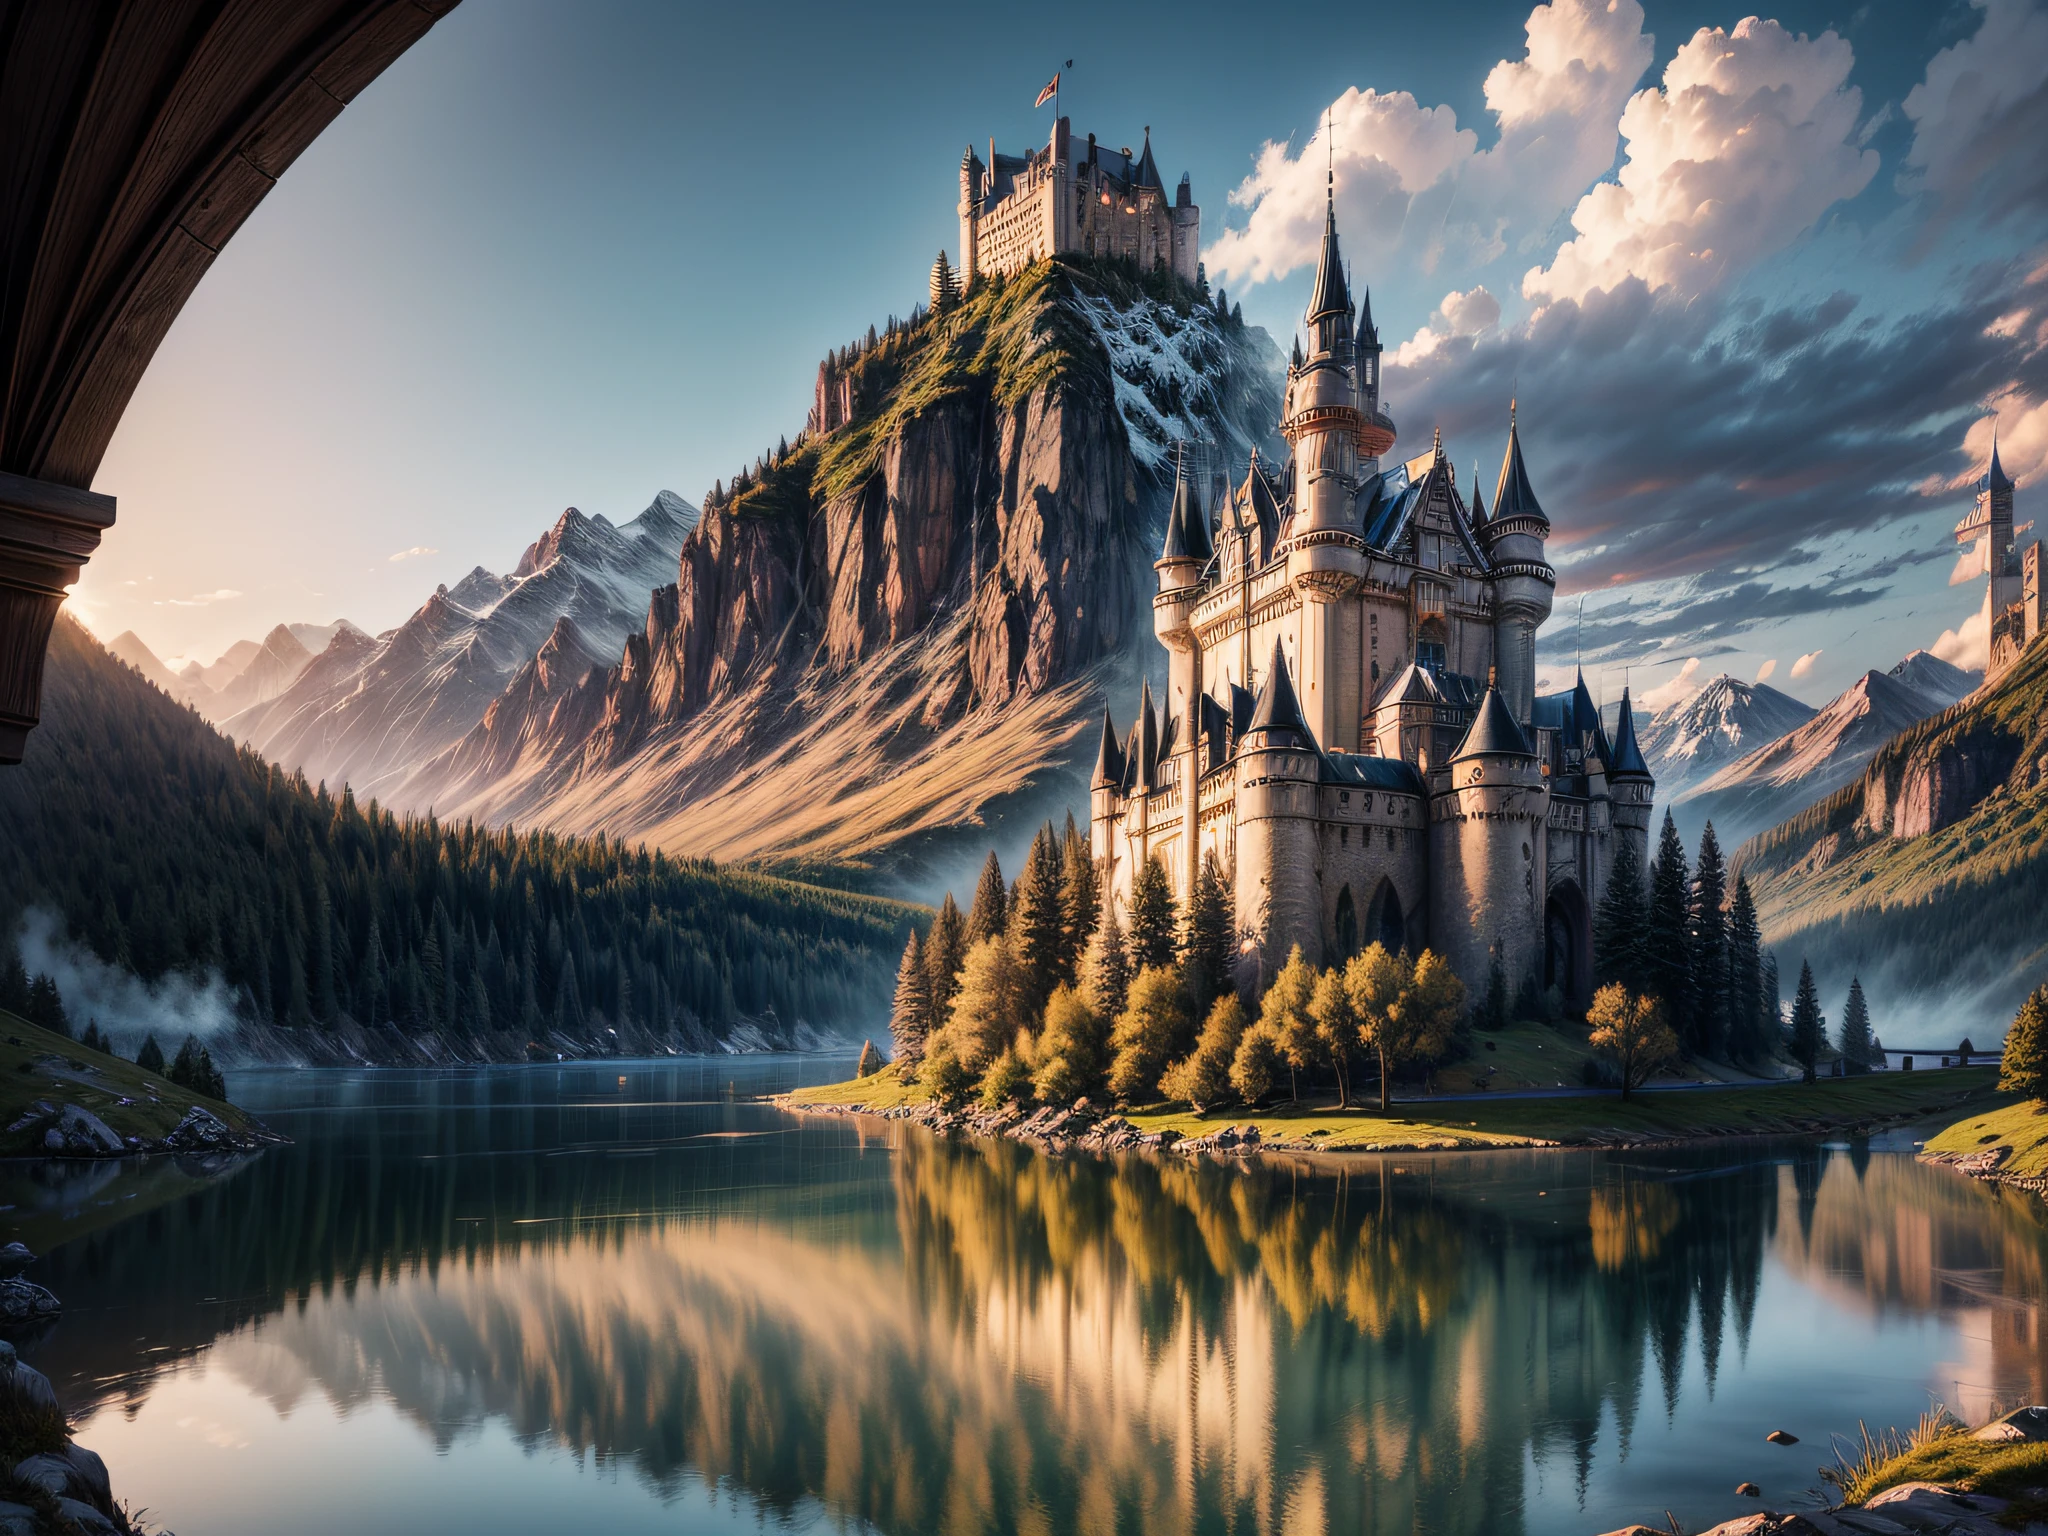 fantasy art, RPG art, photographic, National Geographic quality picture, award winning, (Best Detailed: 1.5), (best quality: 1.5) picture of an epic 1solocastle near the lake at dawn, the Middle ages castle is master crat artistry, there are (4 towers: 1.2), (massive walls: 1.2), (barbicans: 1.2), (flags: 1.2), ( a bridge: 1.2), the entire castle is being reflected in the lake in  a perfect image (Best details, Best quality: 1.5), the lake is calm and placid, its dawn, the sun is rising, there some light clouds in the sky, and sun rays, behind the castle there is a missive snowy mountain as background best quality, (extremely detailed), ultra wide shot, photorealism, depth of field, hyper realistic, 2.5 rendering,